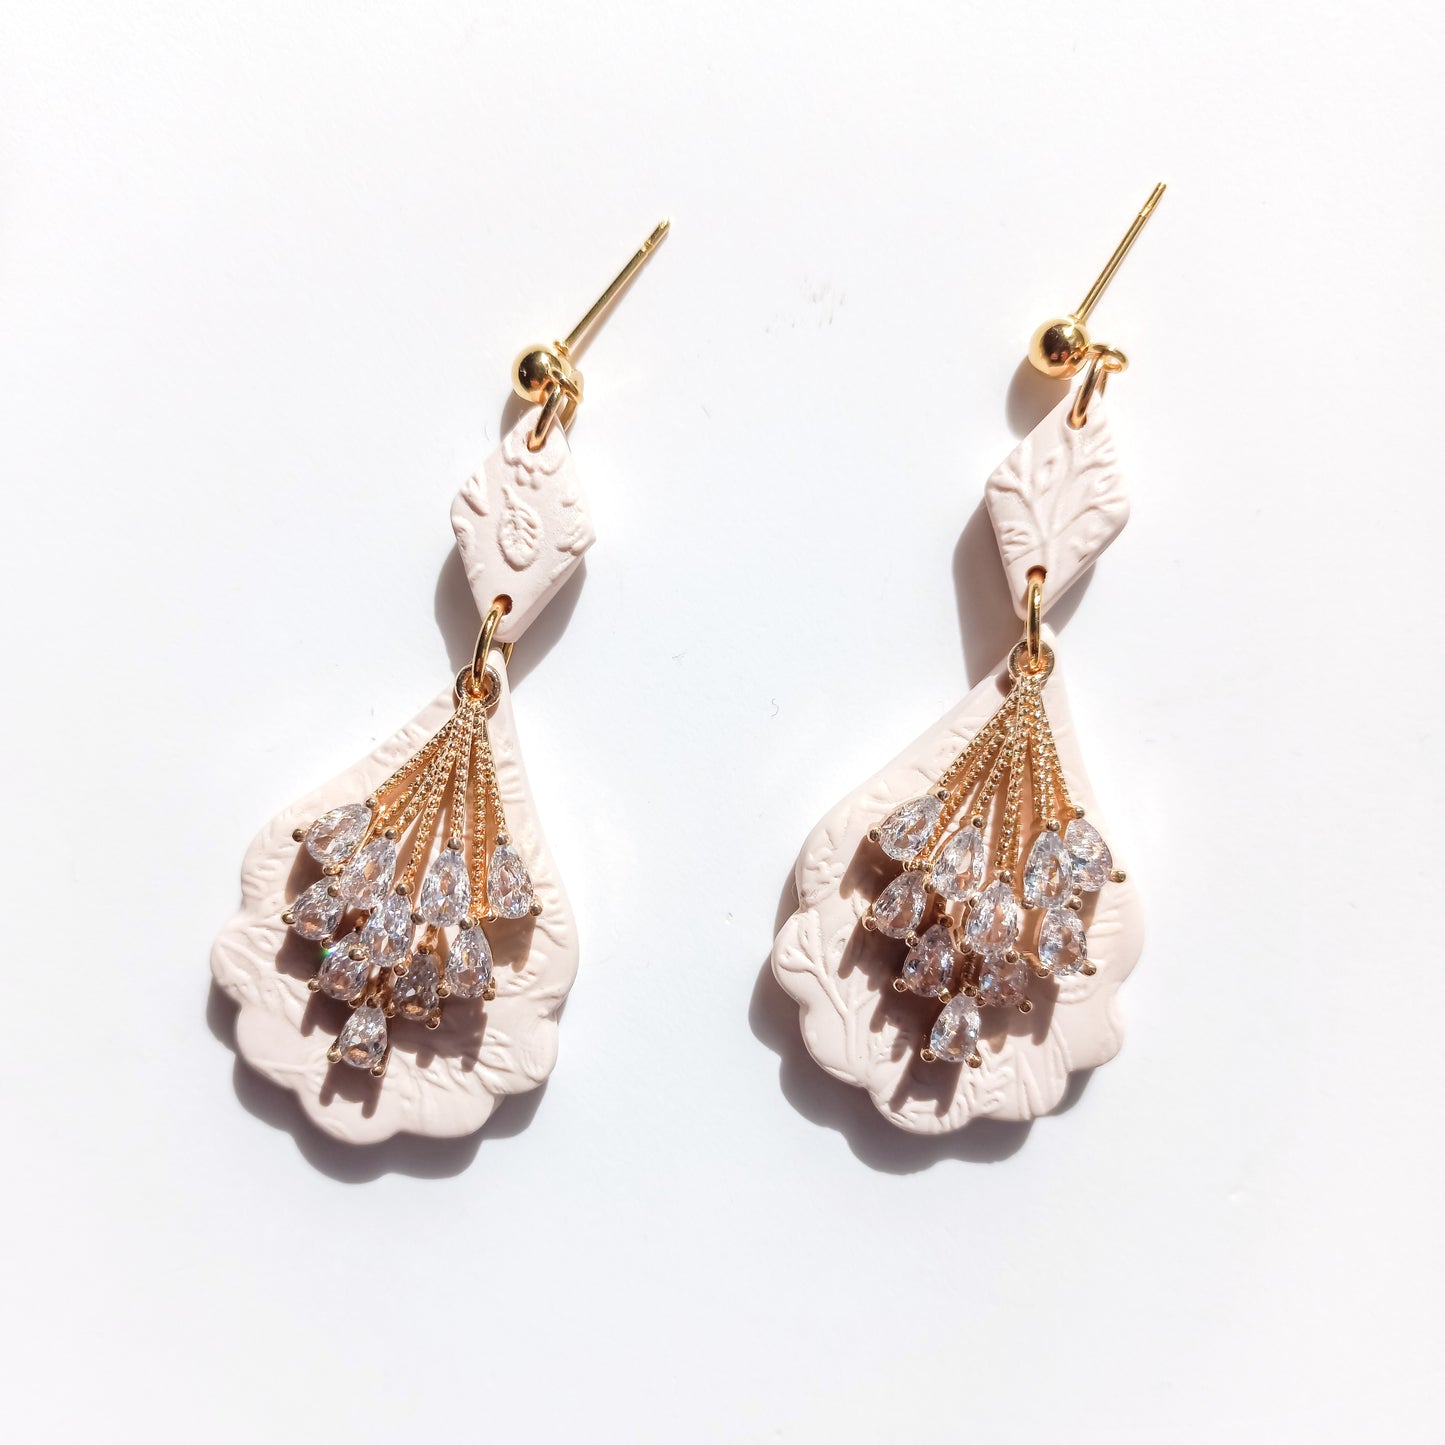 Bridal bloom - Large drop earring with stainless steel gold ball stud and cubic zerconia branch pendant